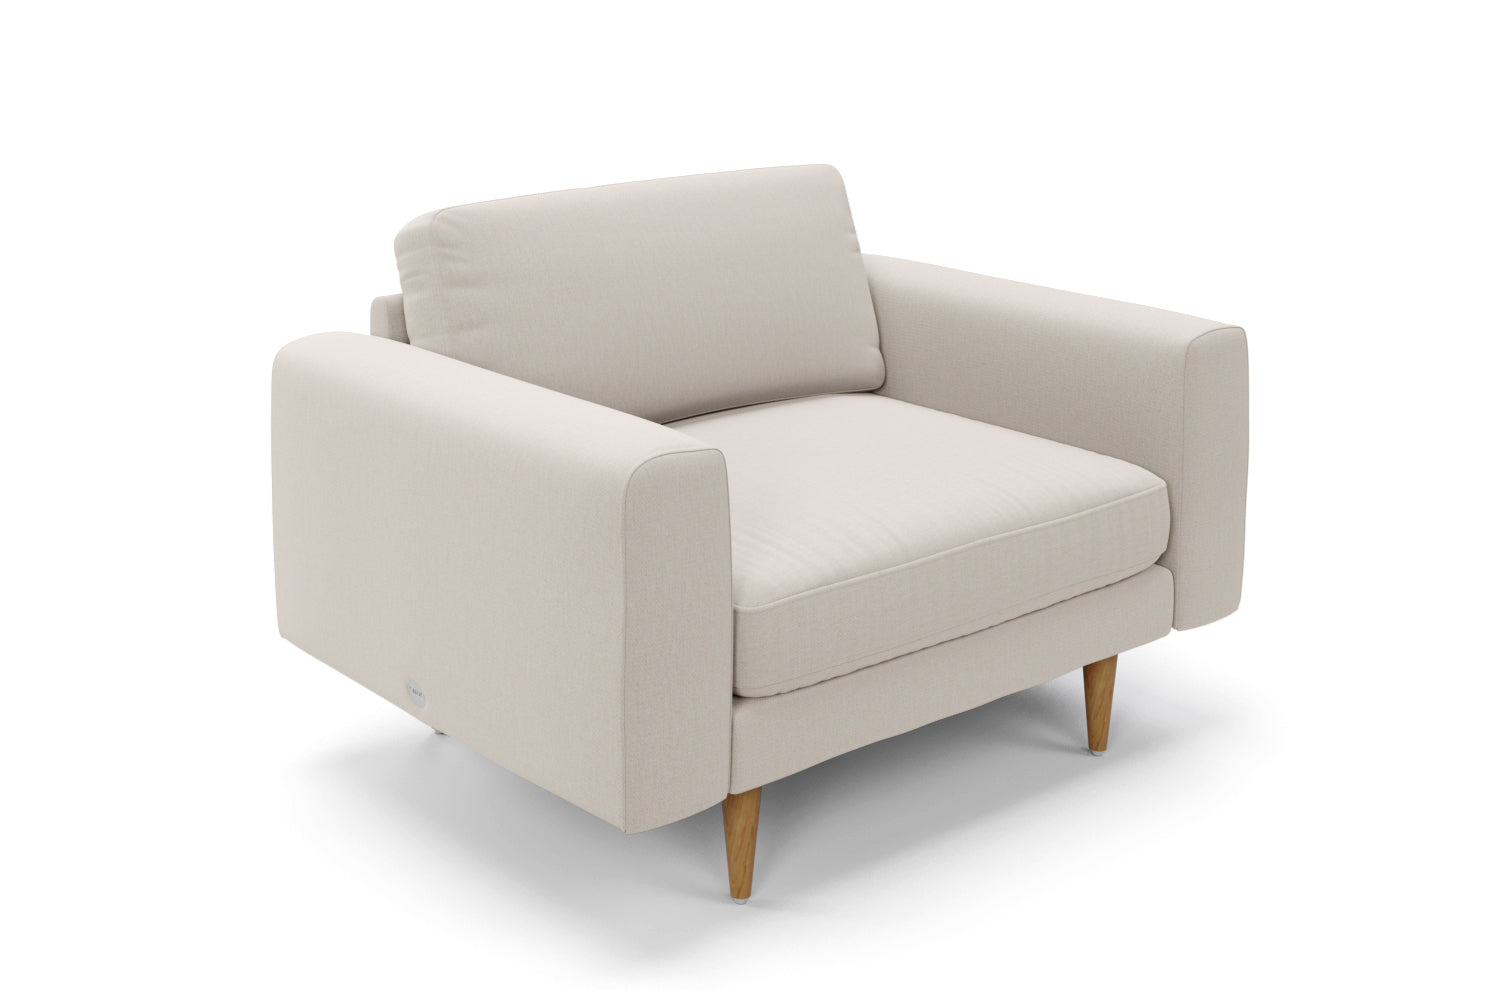 SNUG | The Big Chill 1.5 Seater Snuggler in Biscuit